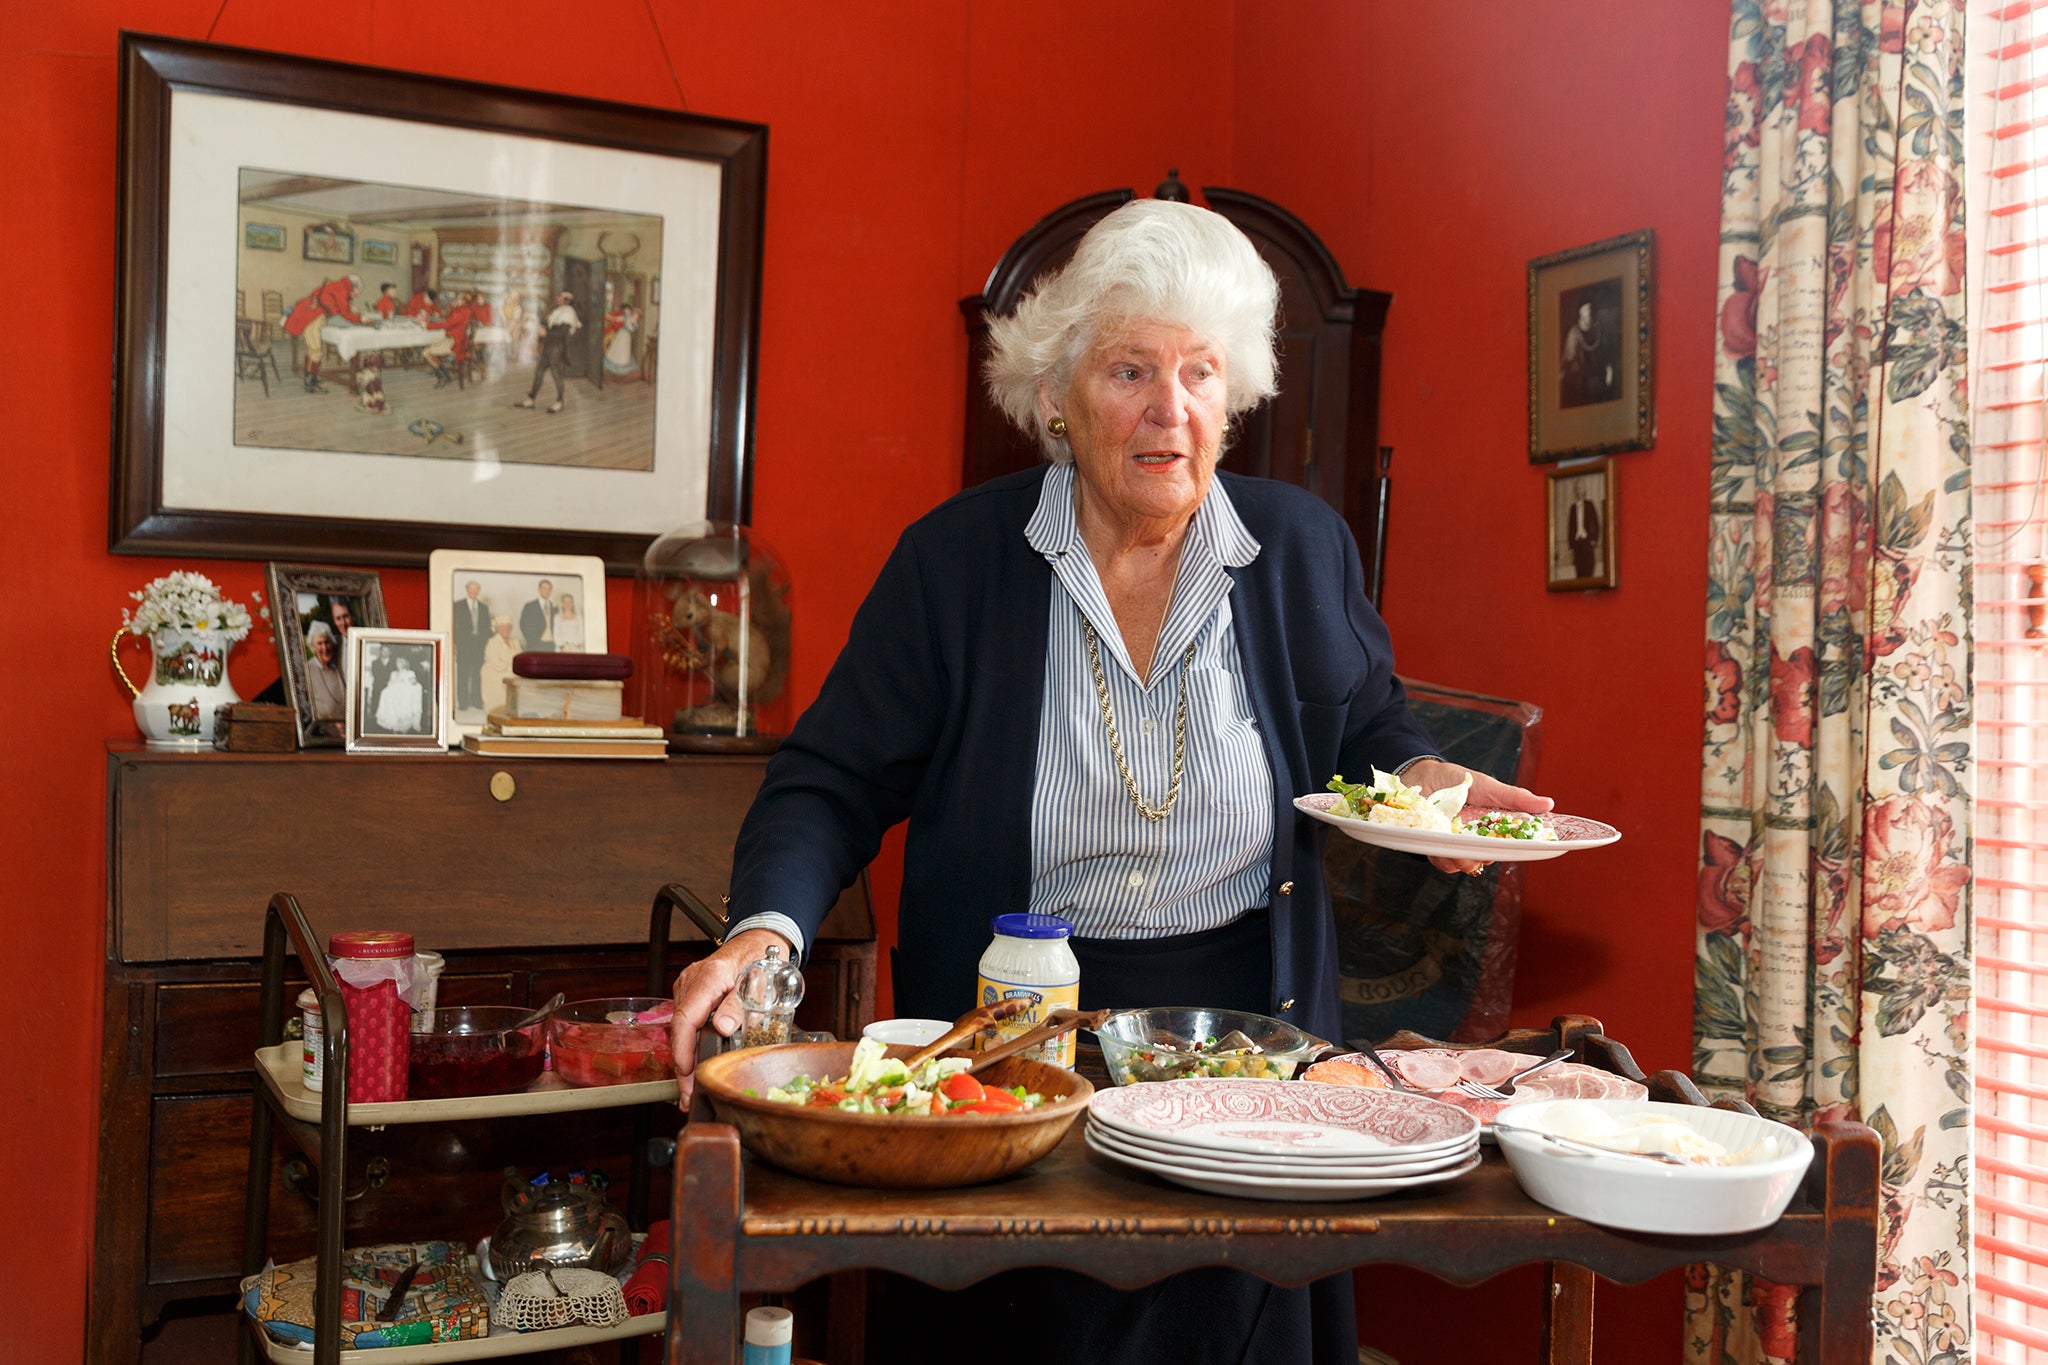 Martin Parr unveils new photography series showing Brits at mealtime